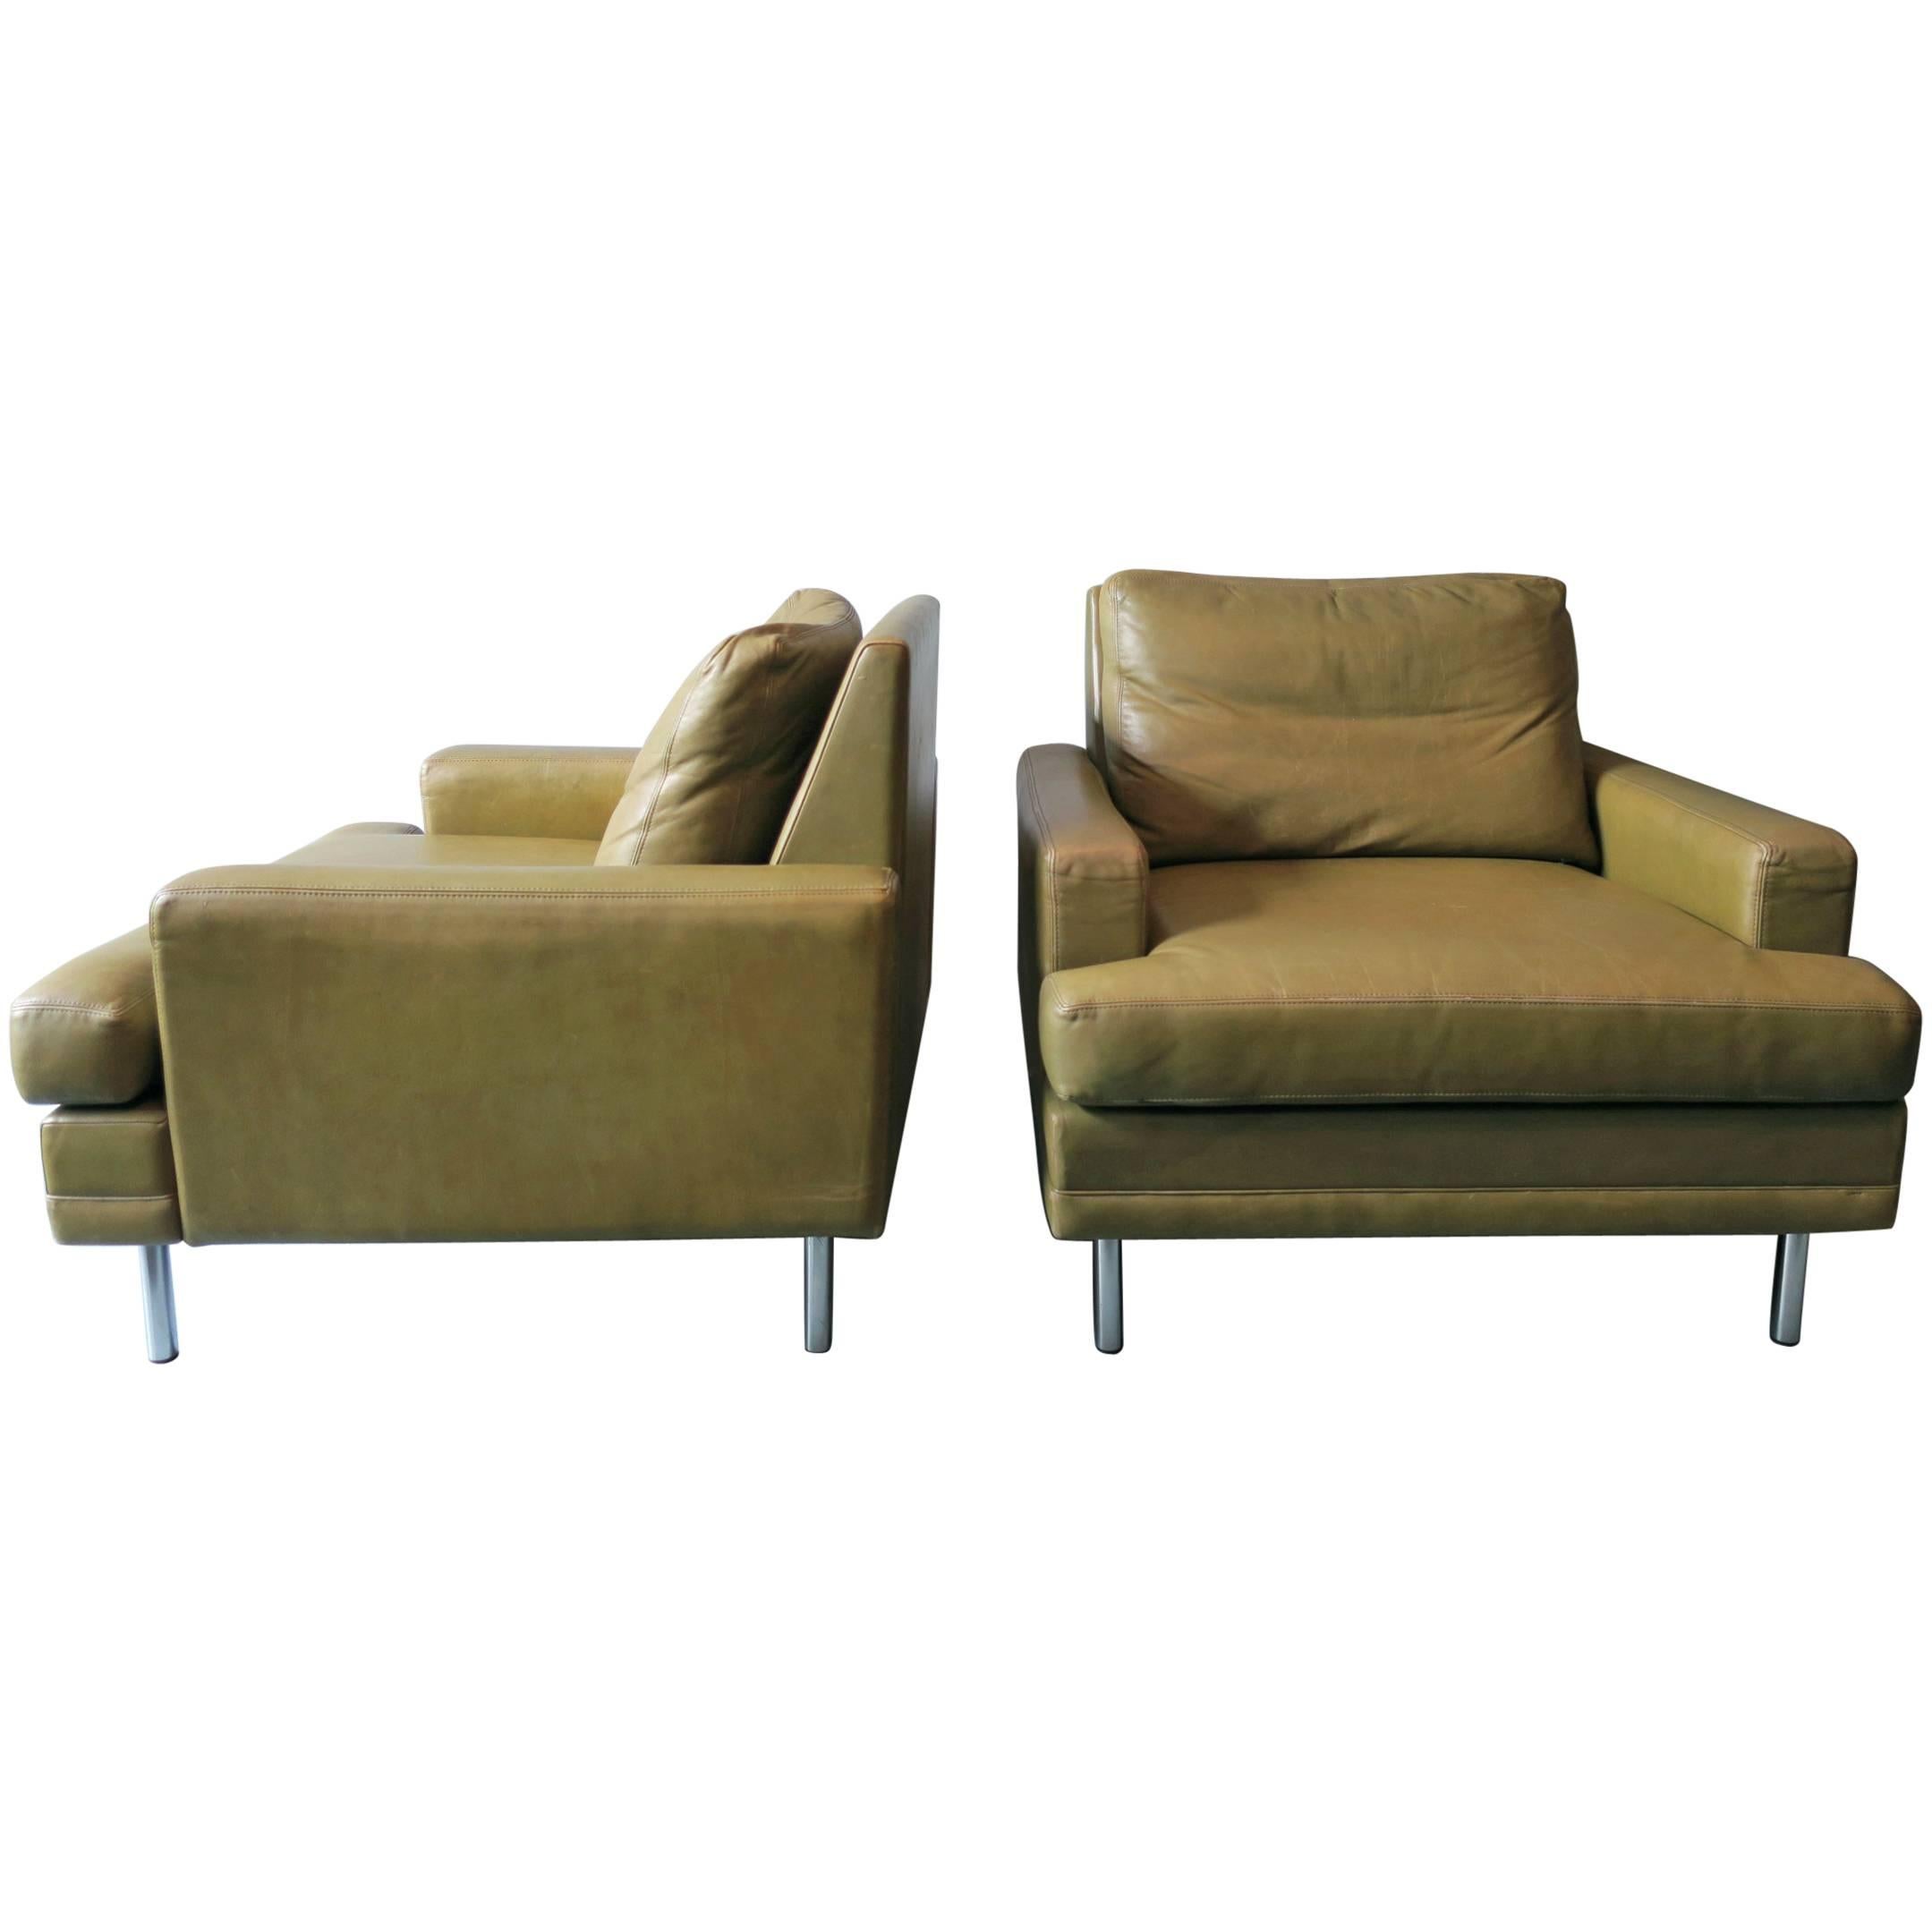 Rare Pair of Pistachio Leather Lounge Chairs, 1960-1970 For Sale